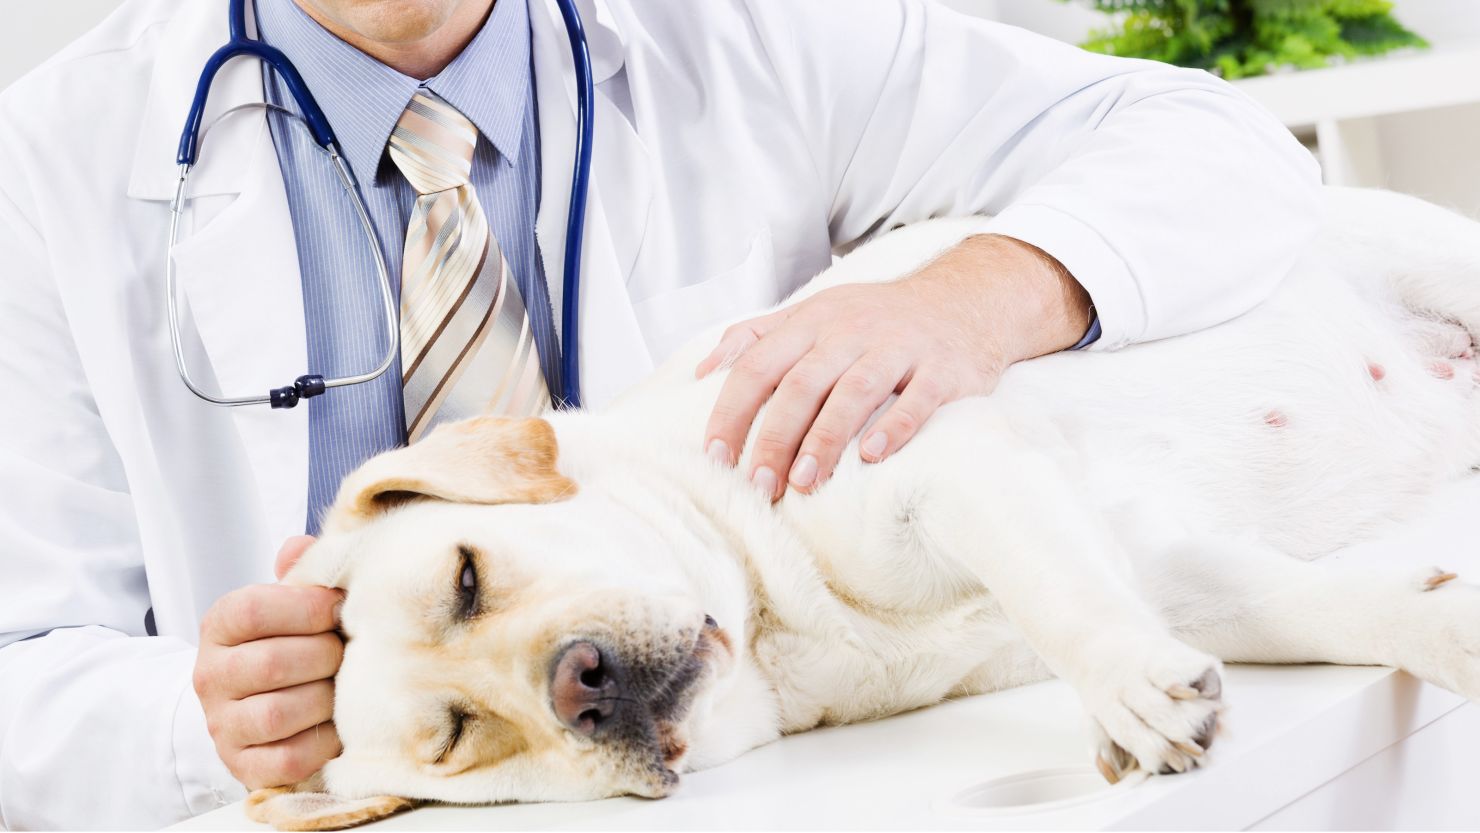 Two viruses -- A H3N8 and A H3N2 -- cause dog flu, according to the CDC.